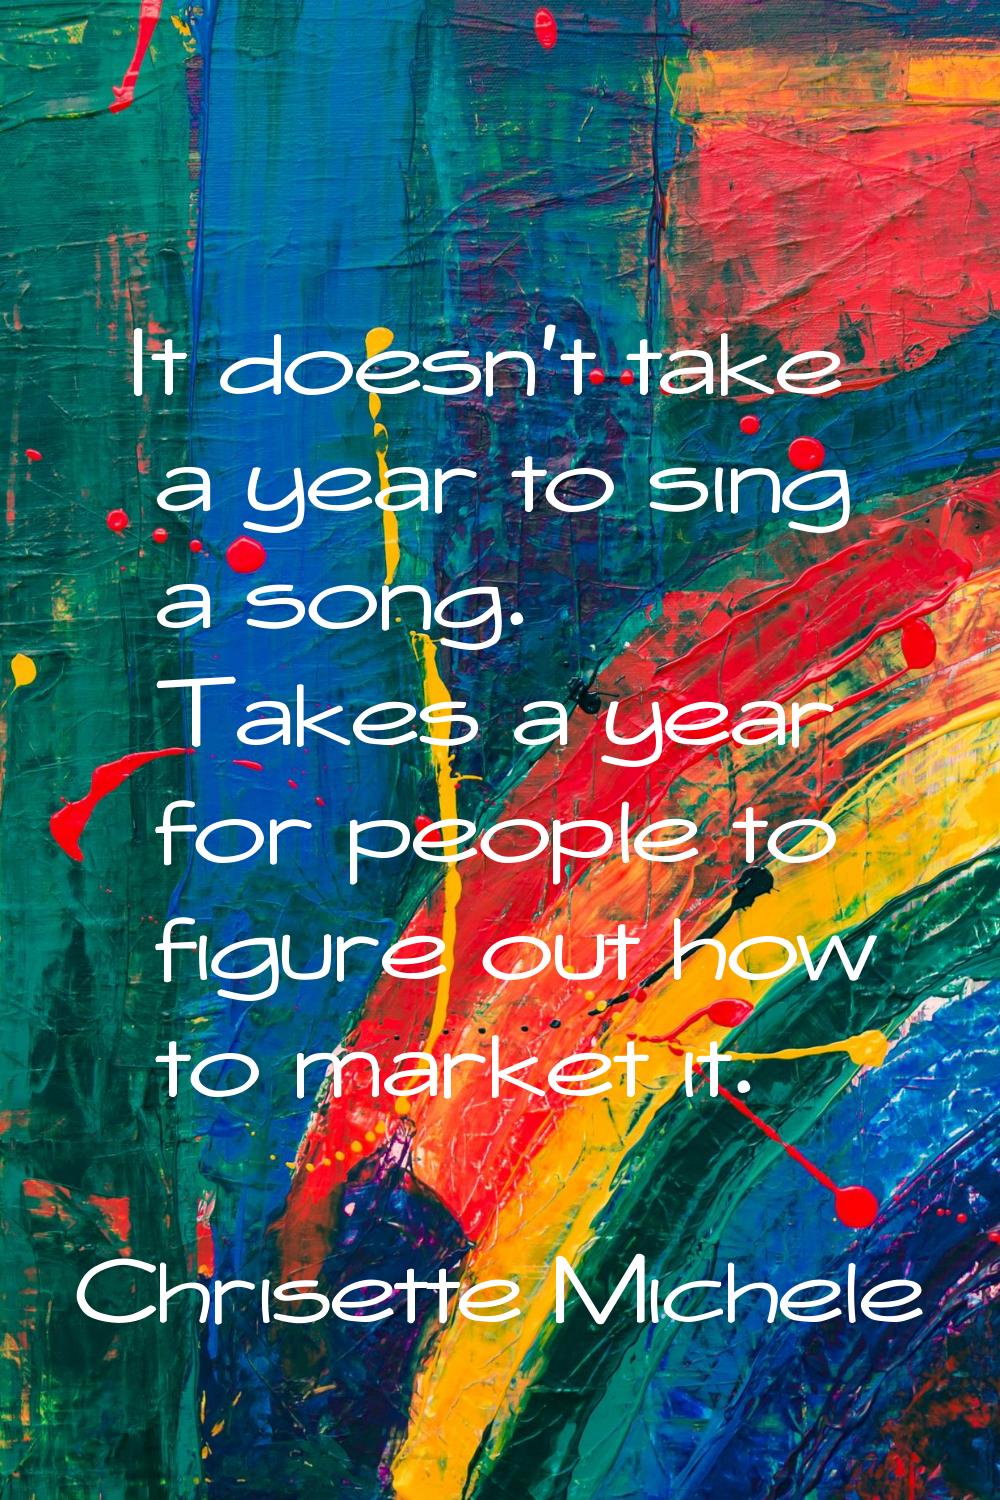 It doesn't take a year to sing a song. Takes a year for people to figure out how to market it.